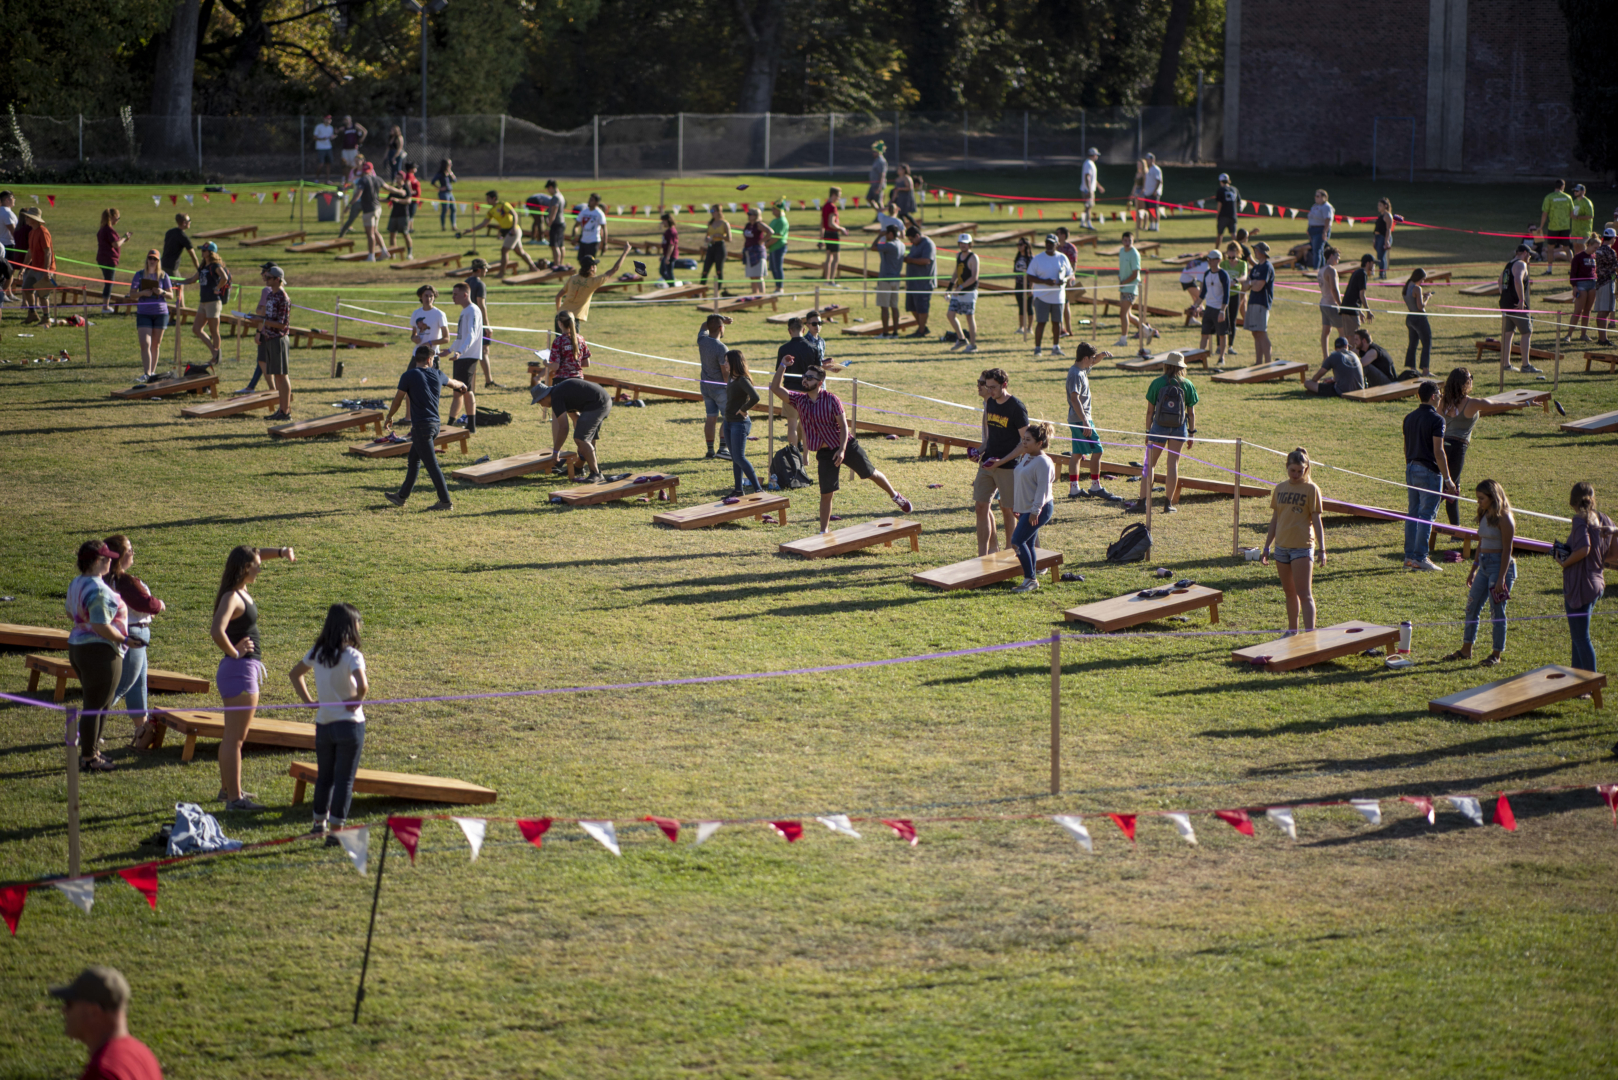 A distanced view show dozens of teams playing corn hole on the Yolo Hall field.